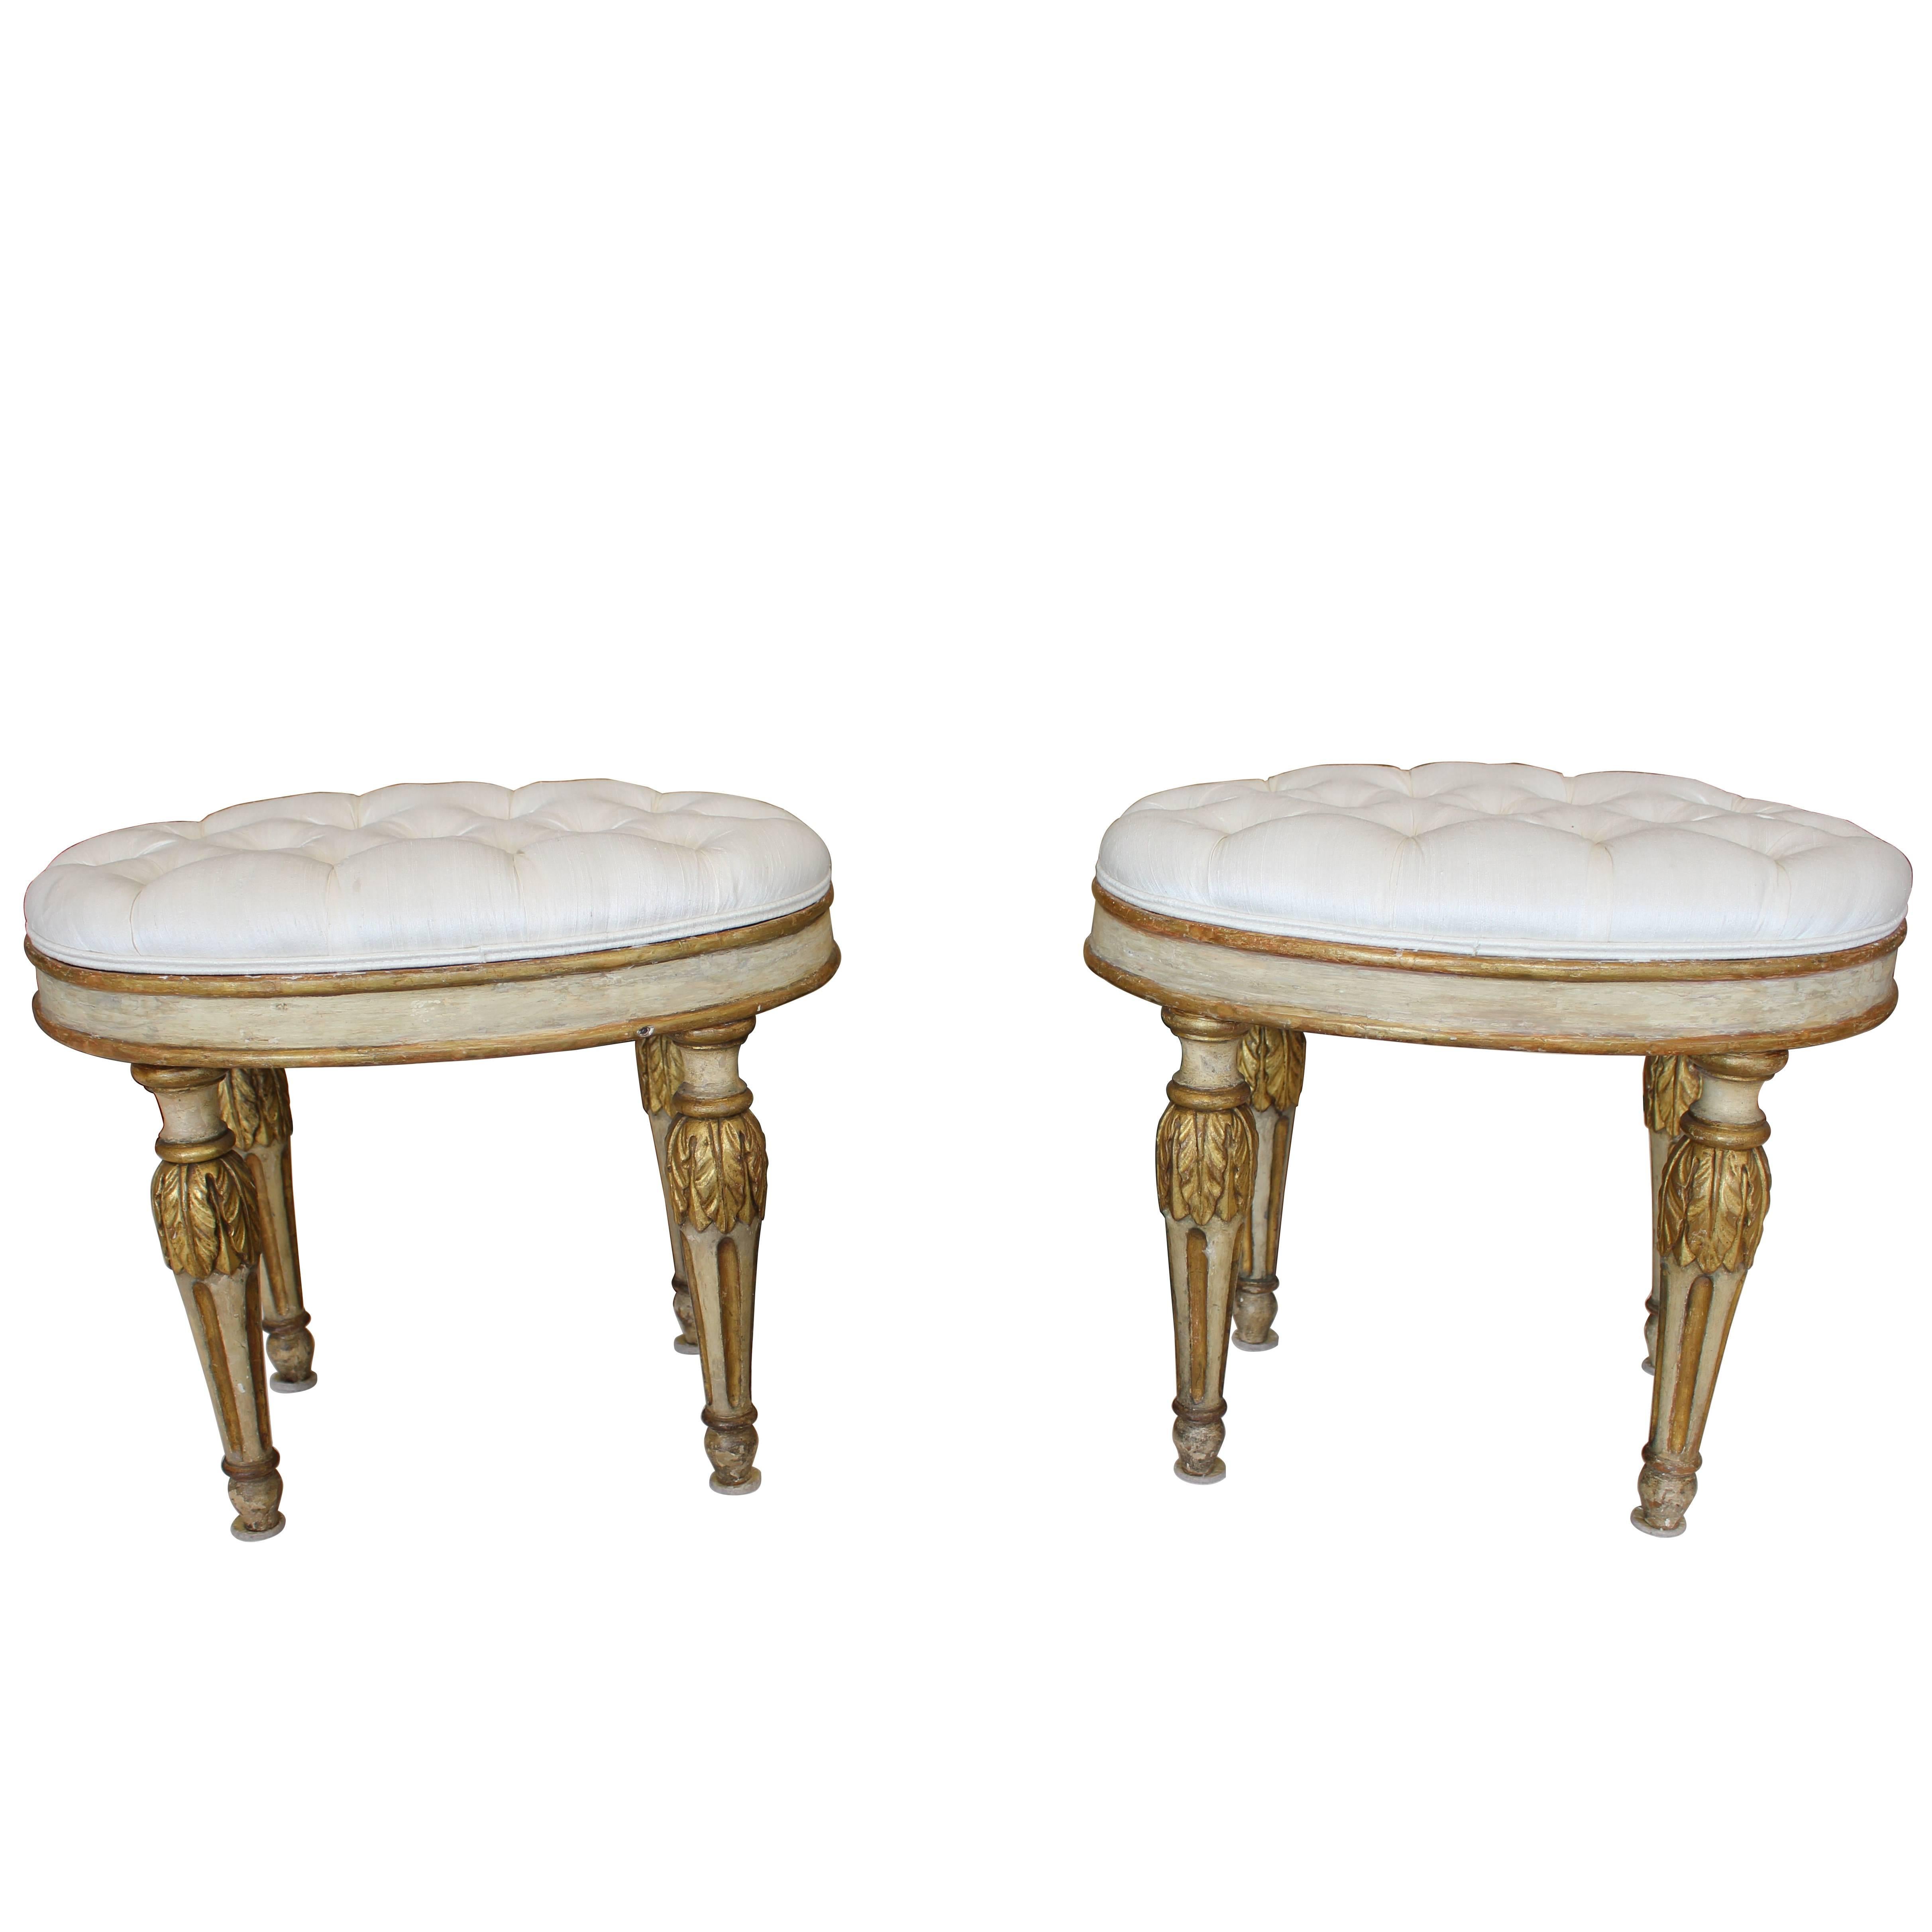 Pair of Italian Neoclassical Late 18th Century Oval Stools with Upholstered Seat